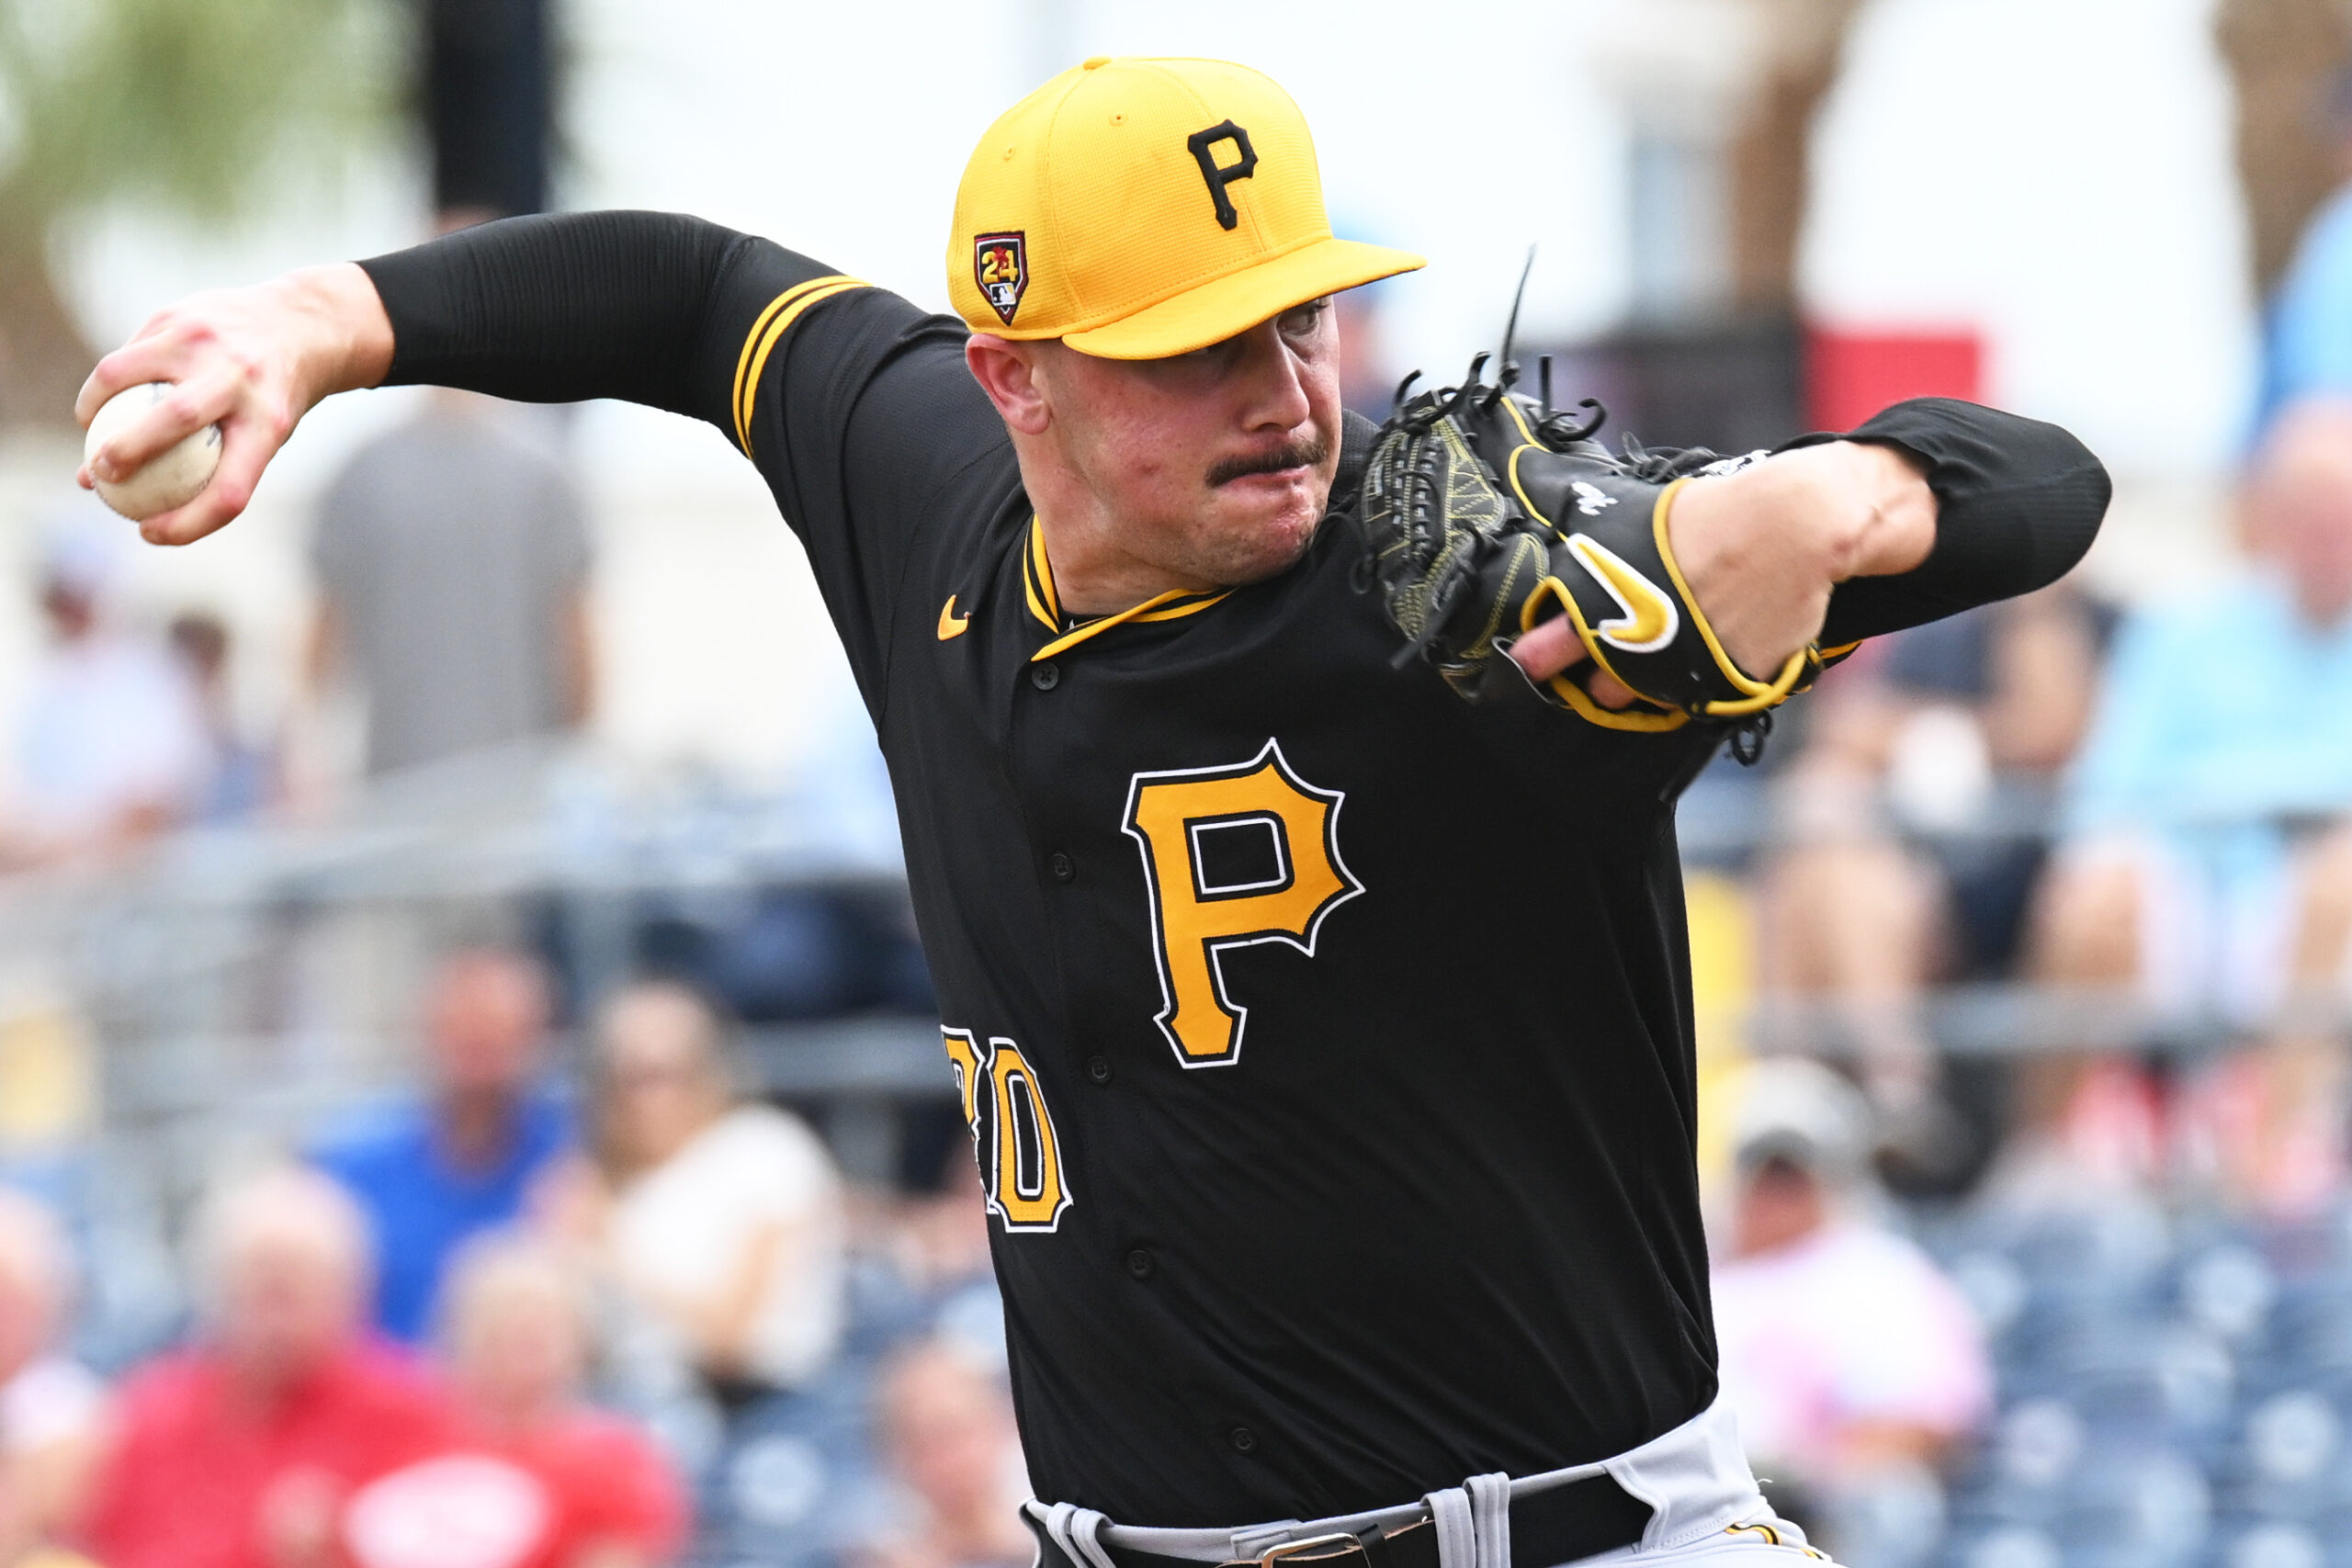 Impressions From the Pirates' Spring Breakout Game